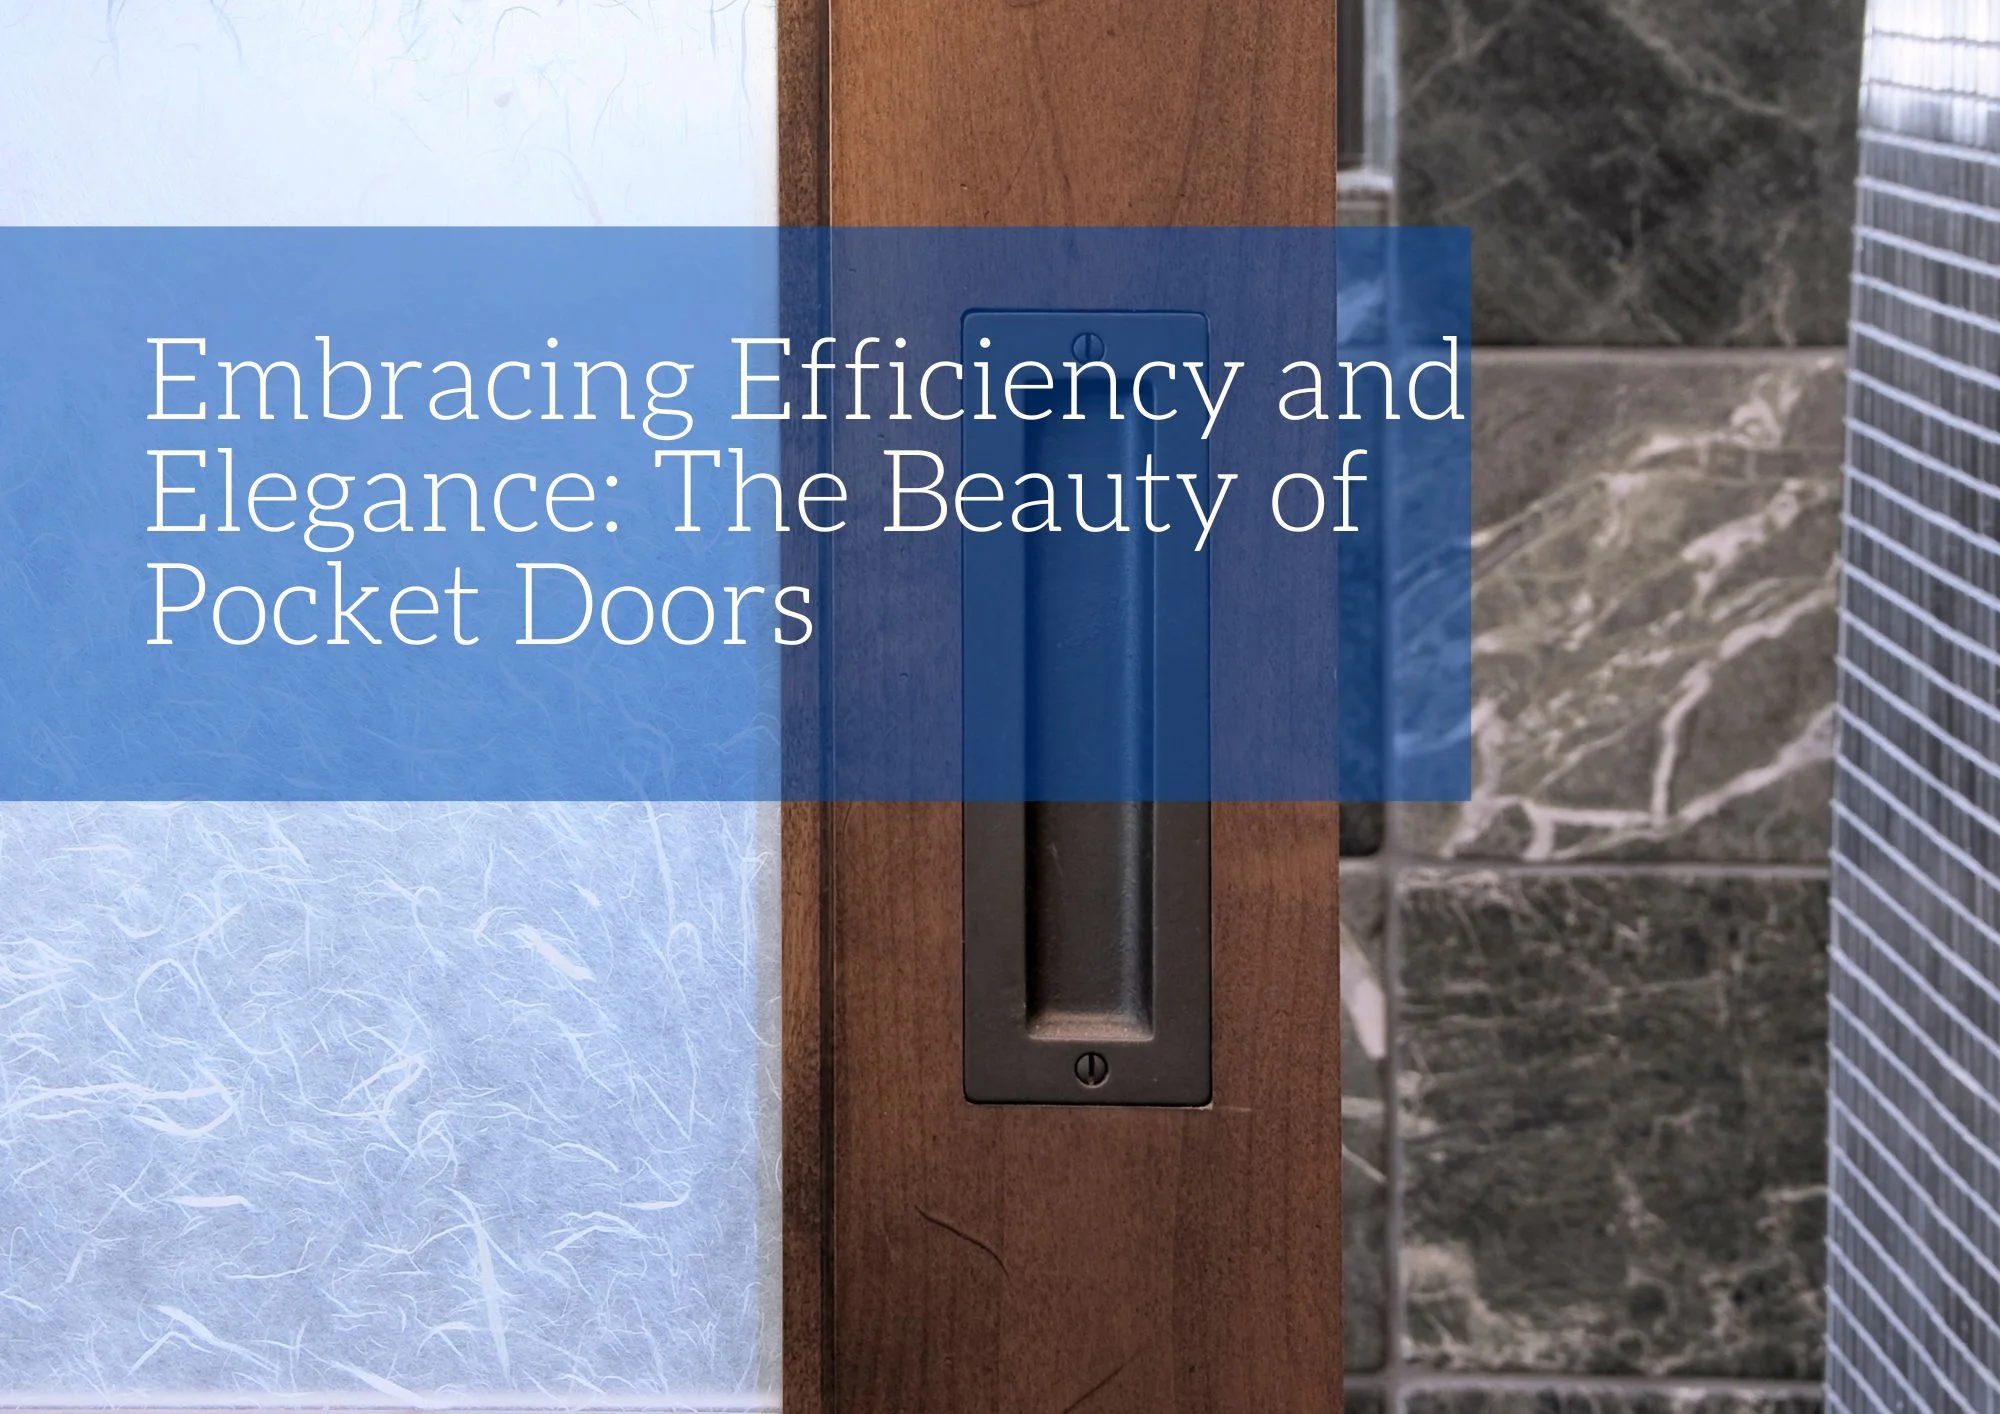 Embracing Efficiency and Elegance: The Beauty of Pocket Doors